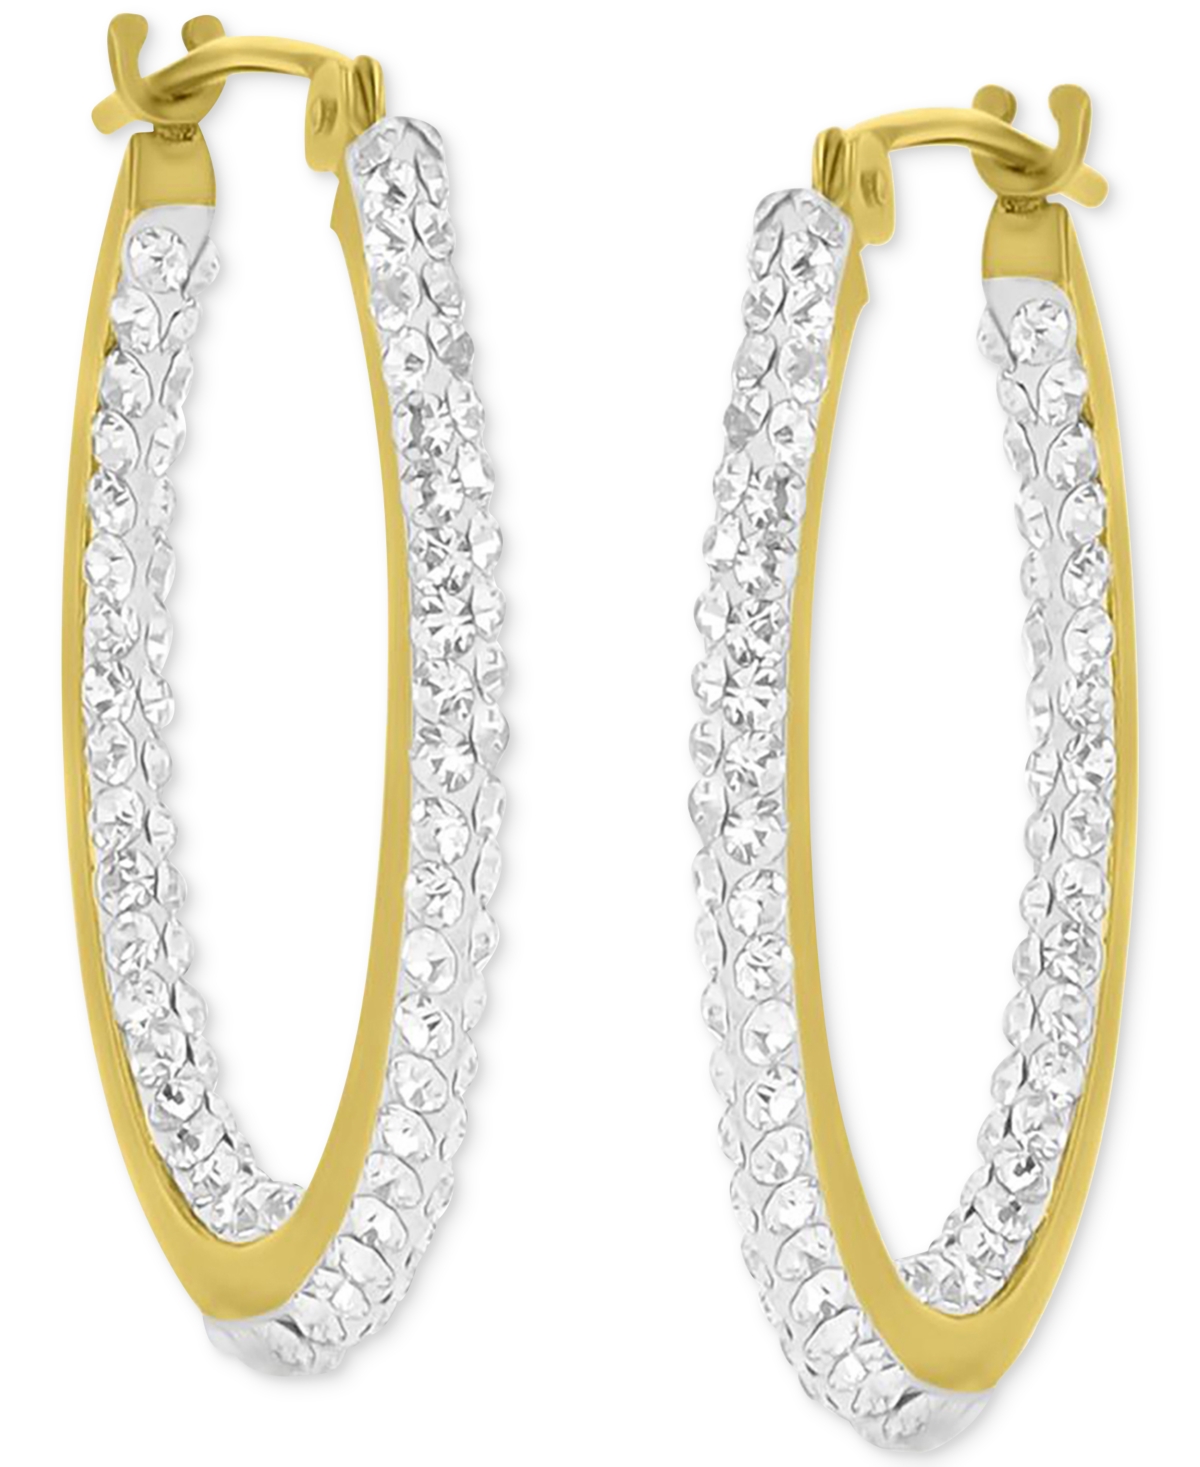 Crystal Pave In & Out Small Hoop Earrings in 10k Gold, 0.79" - Gold